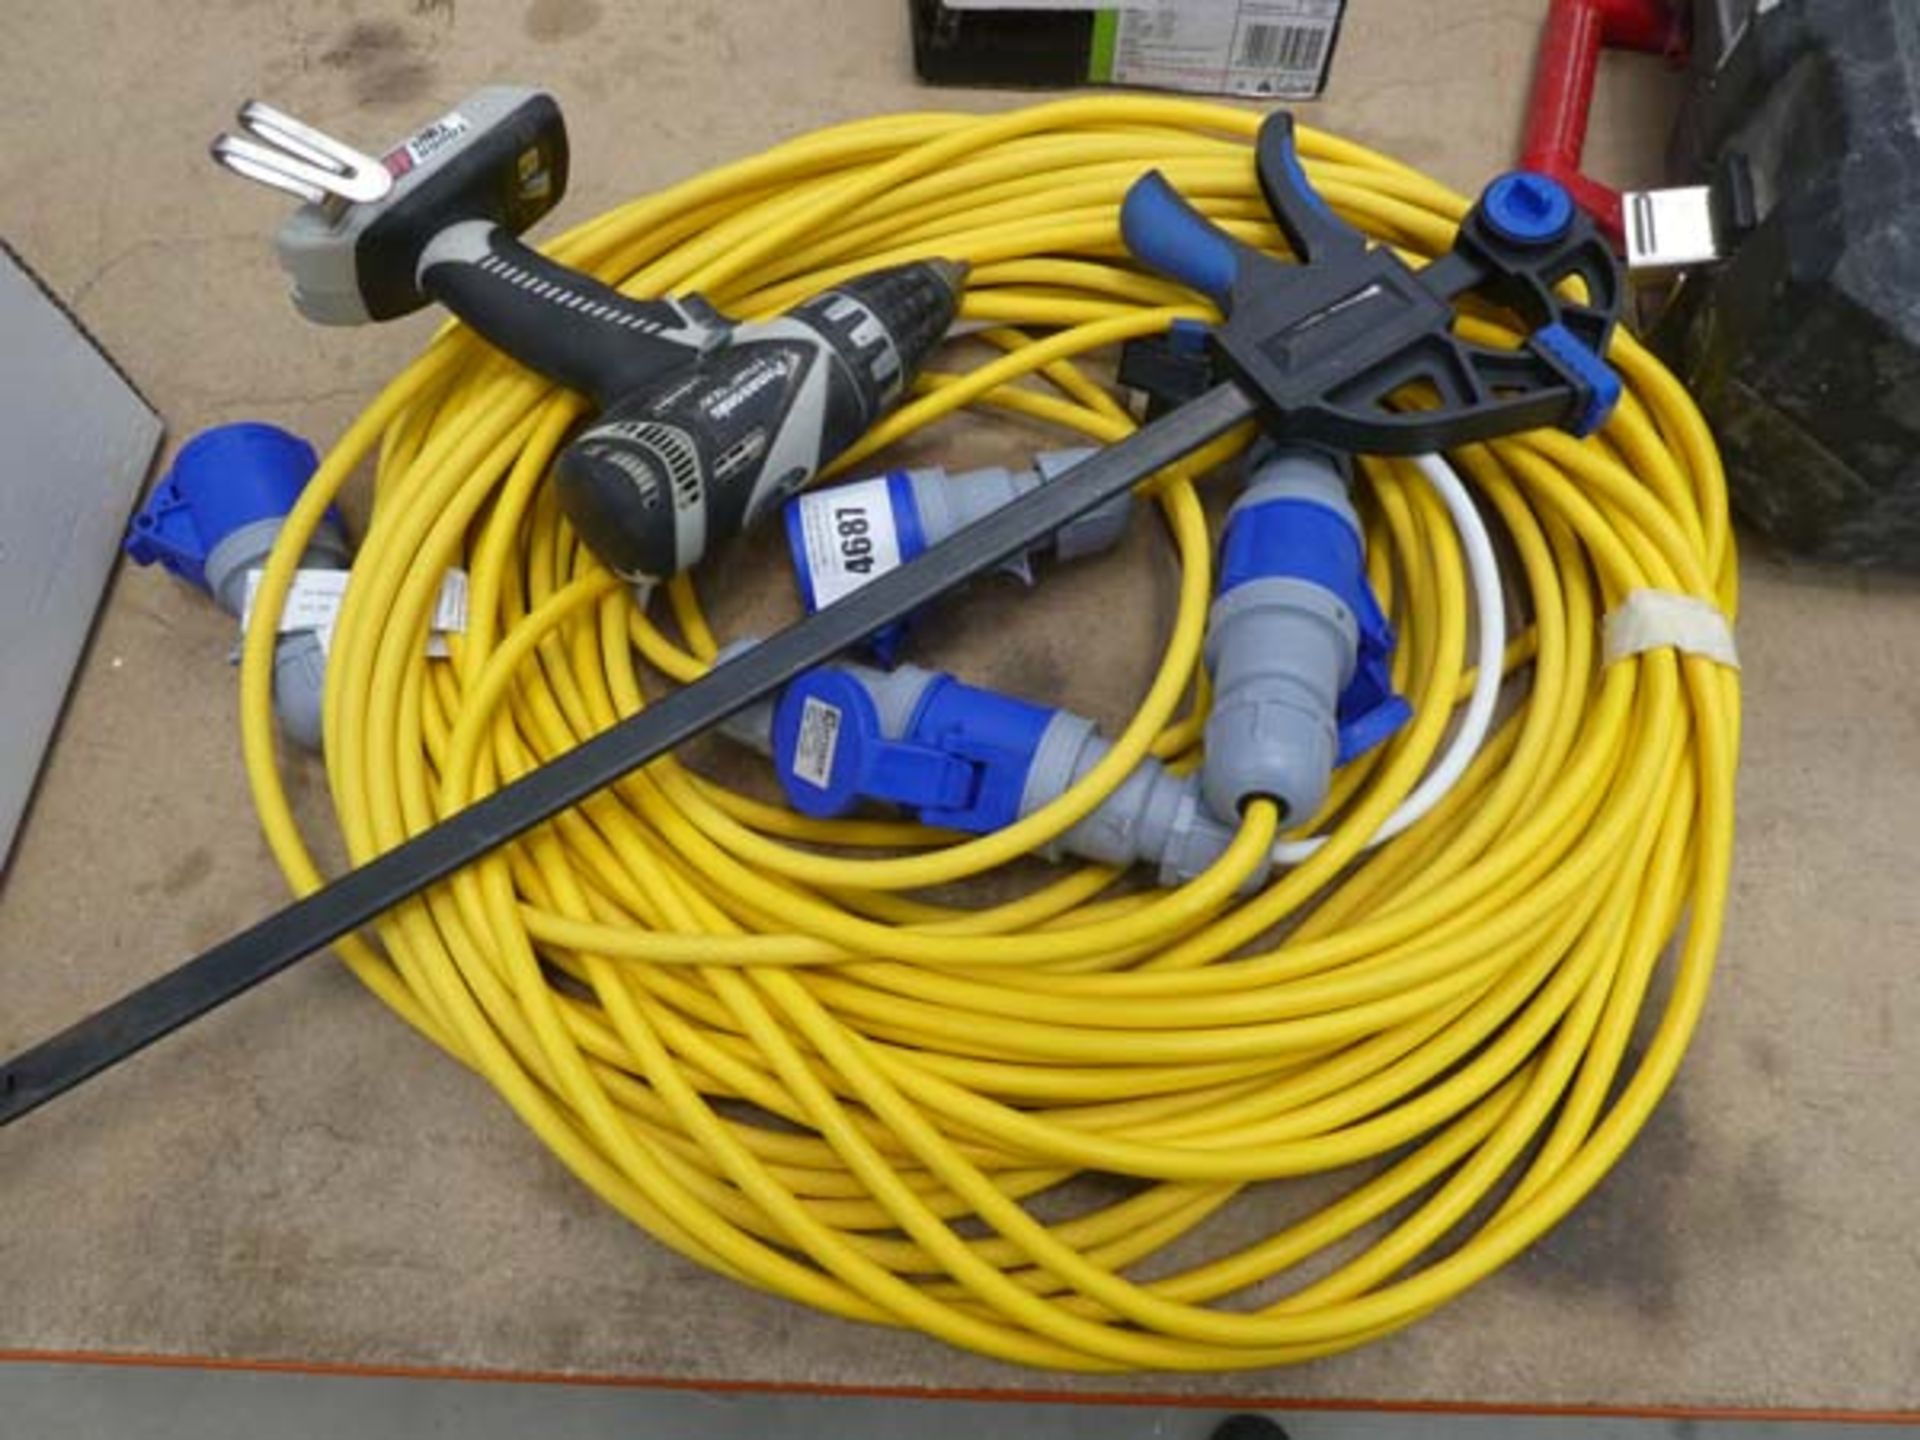 Panasonic drill body, clamp and some yellow extension cable